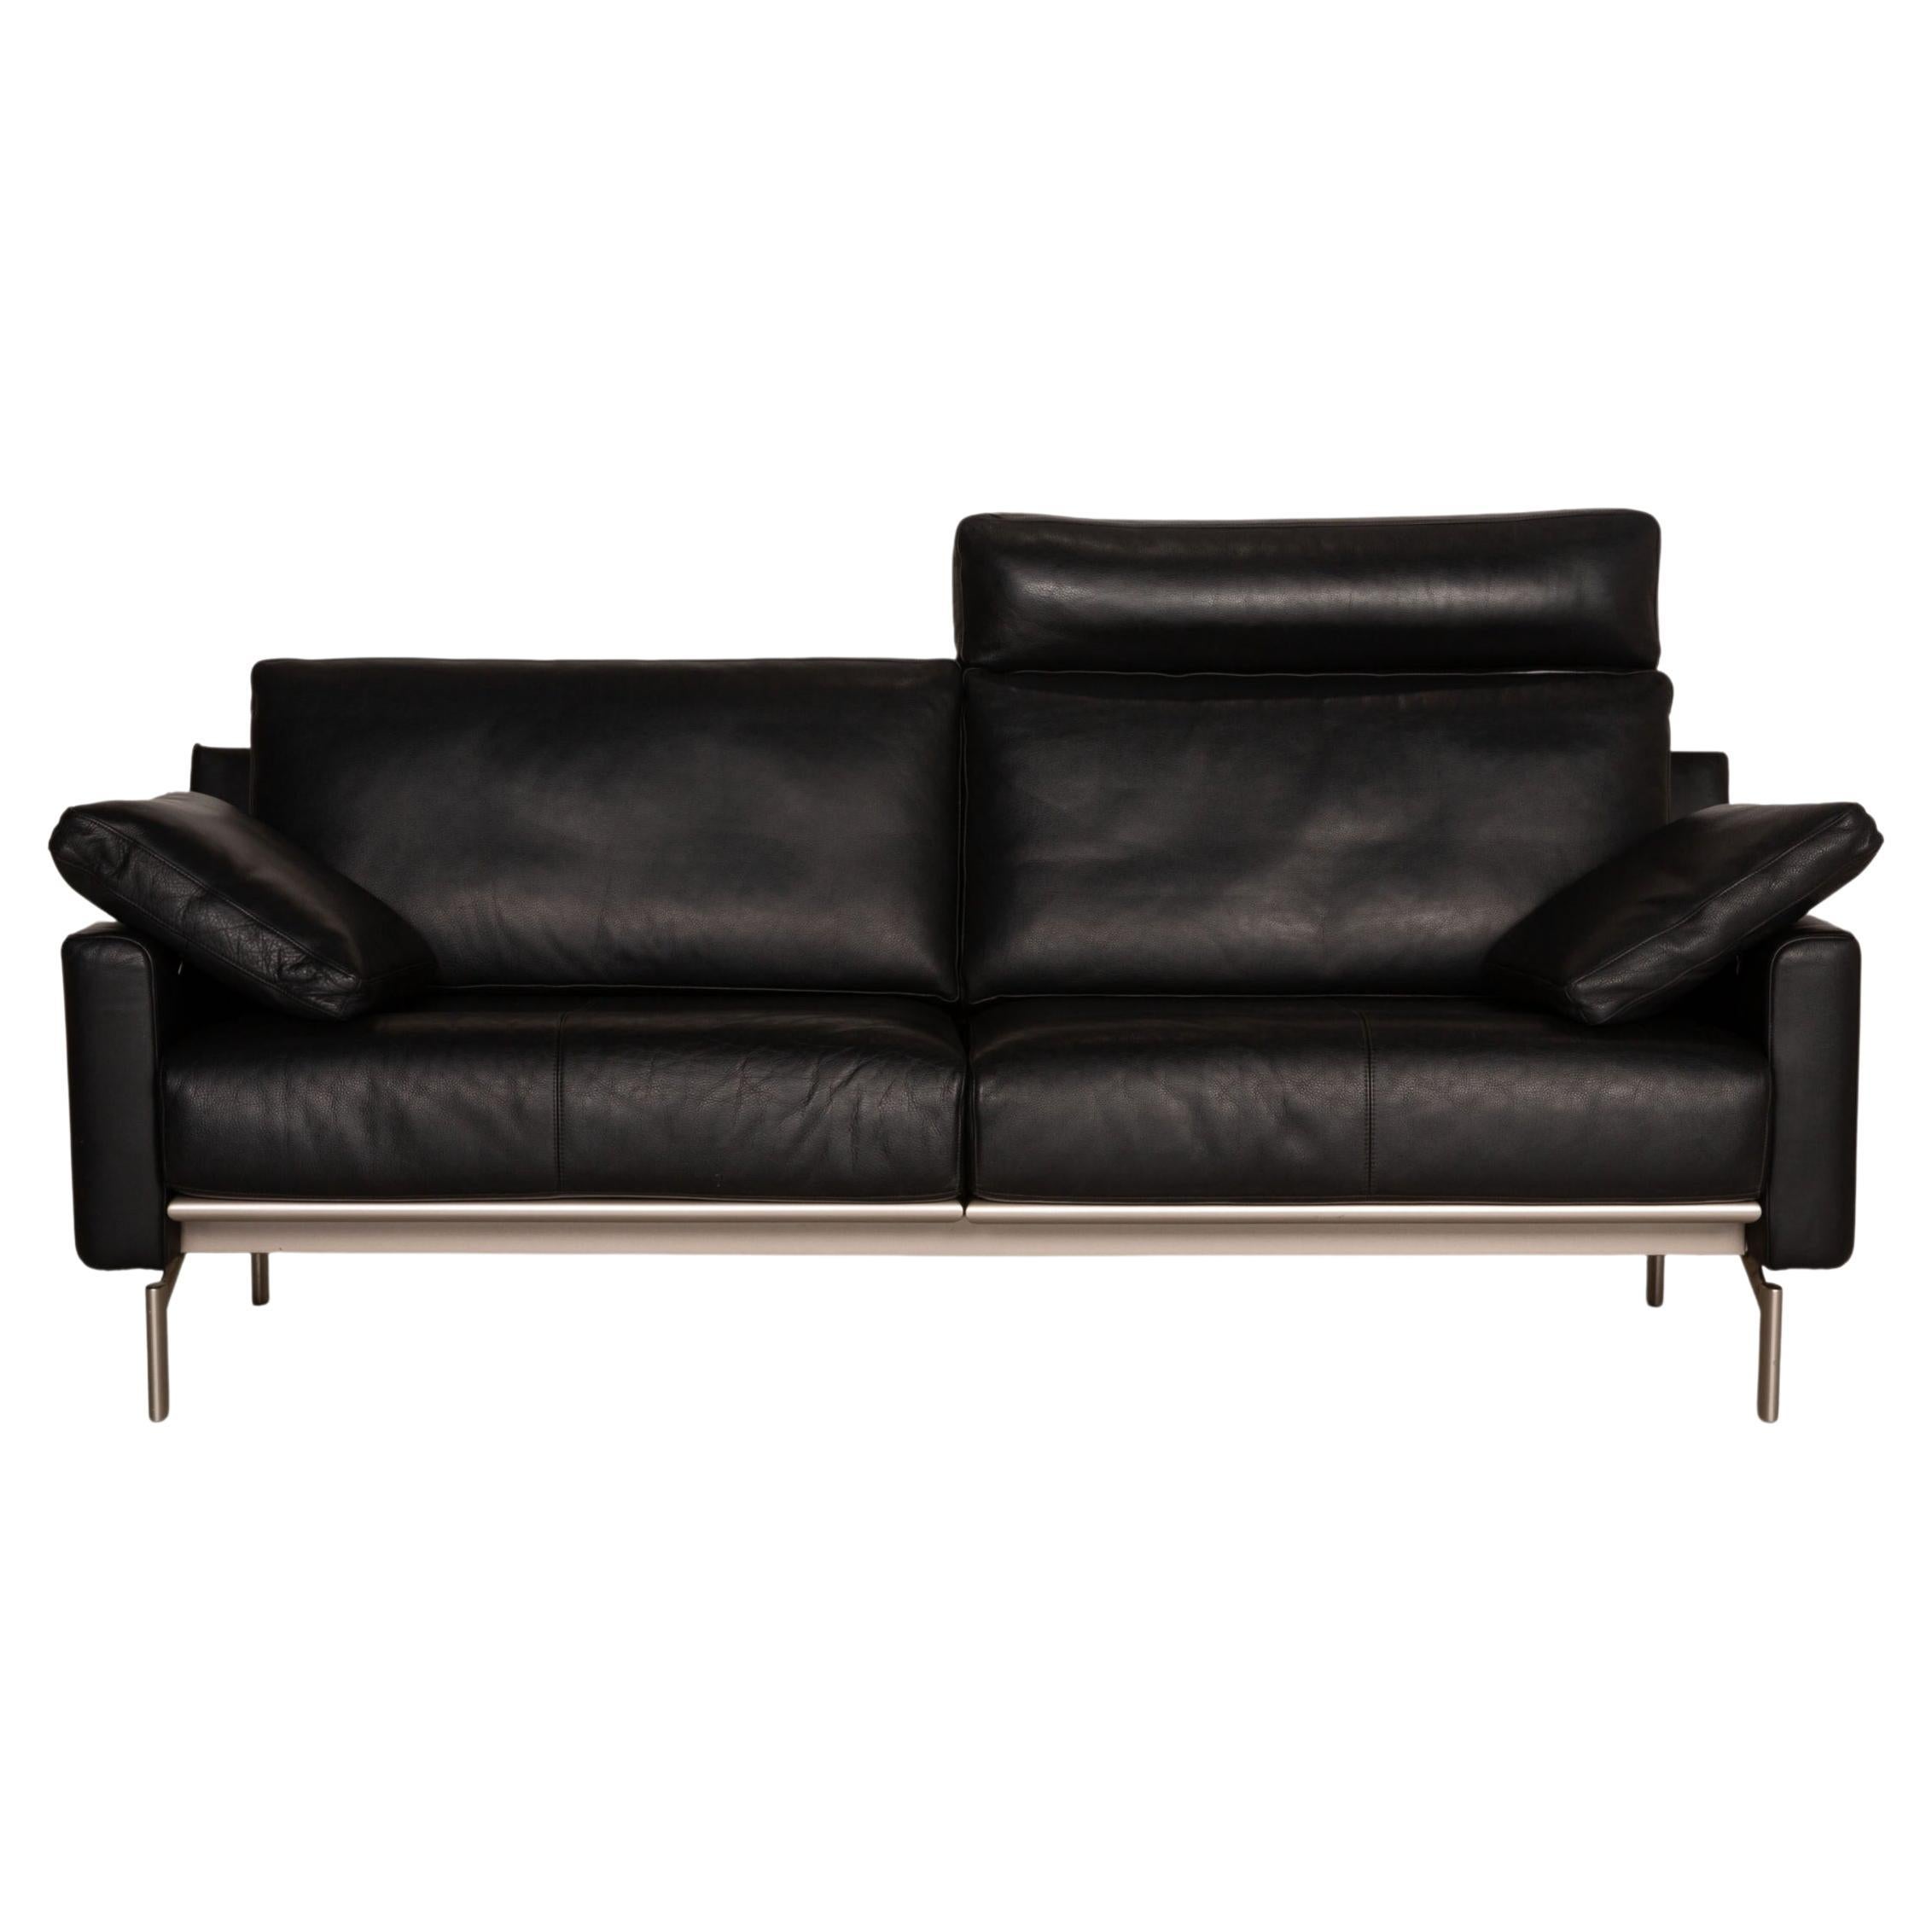 Cor Ala Leather Sofa Black Three Seater Couch For Sale